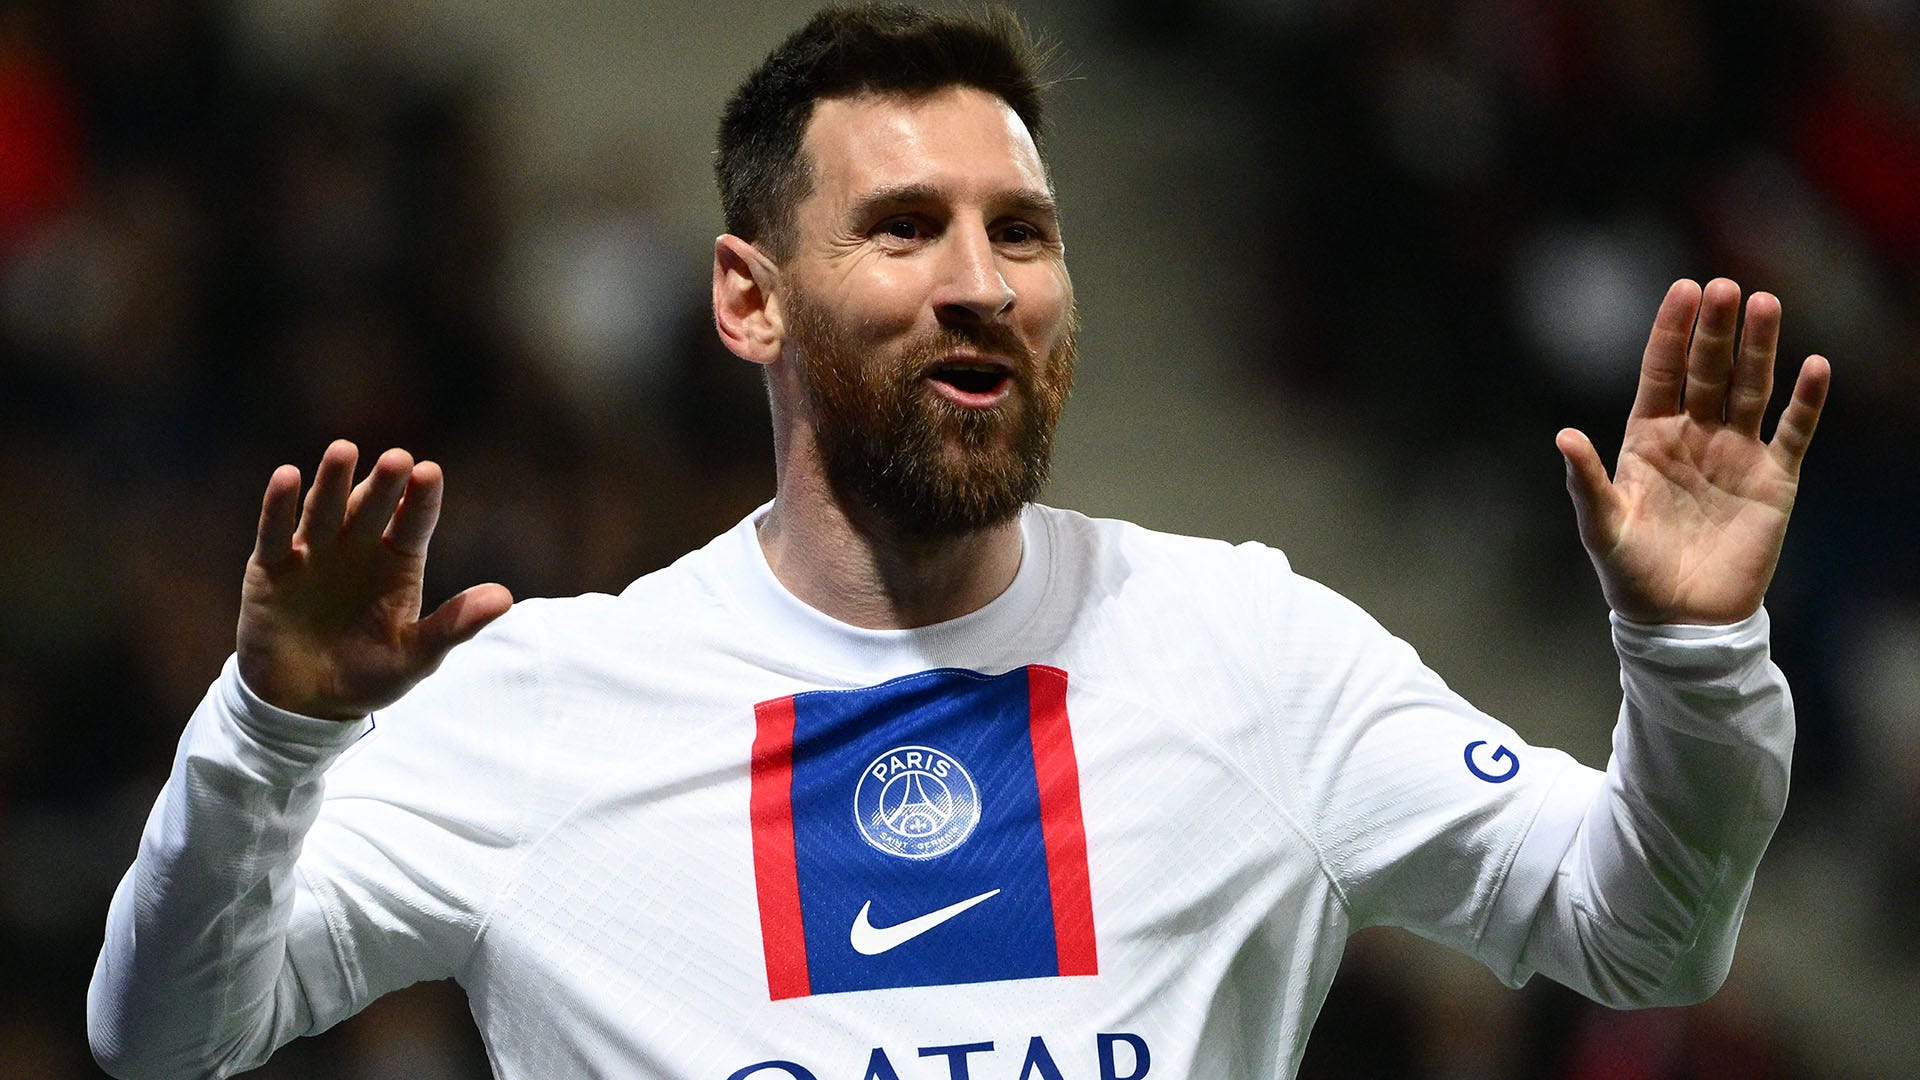 Lionel Messi Surpasses Cristiano Ronaldo to Become All-Time Top